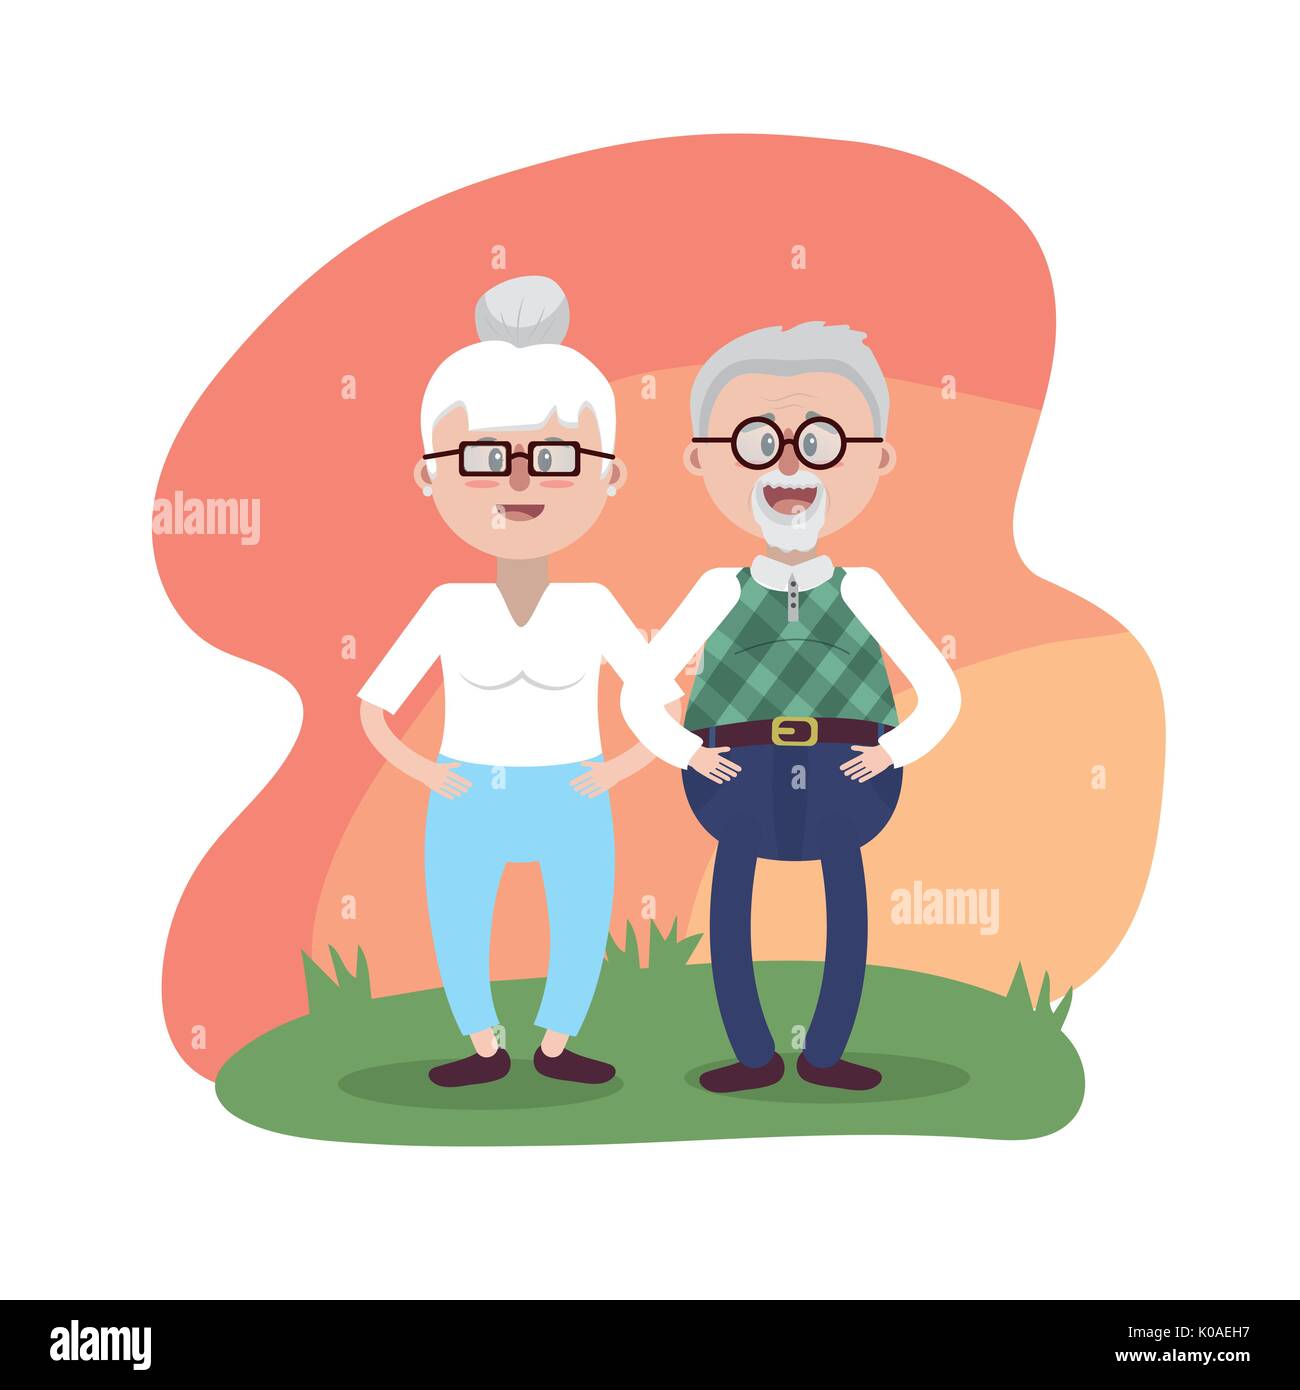 grandparent together with glasses and hairstyle Stock Vector